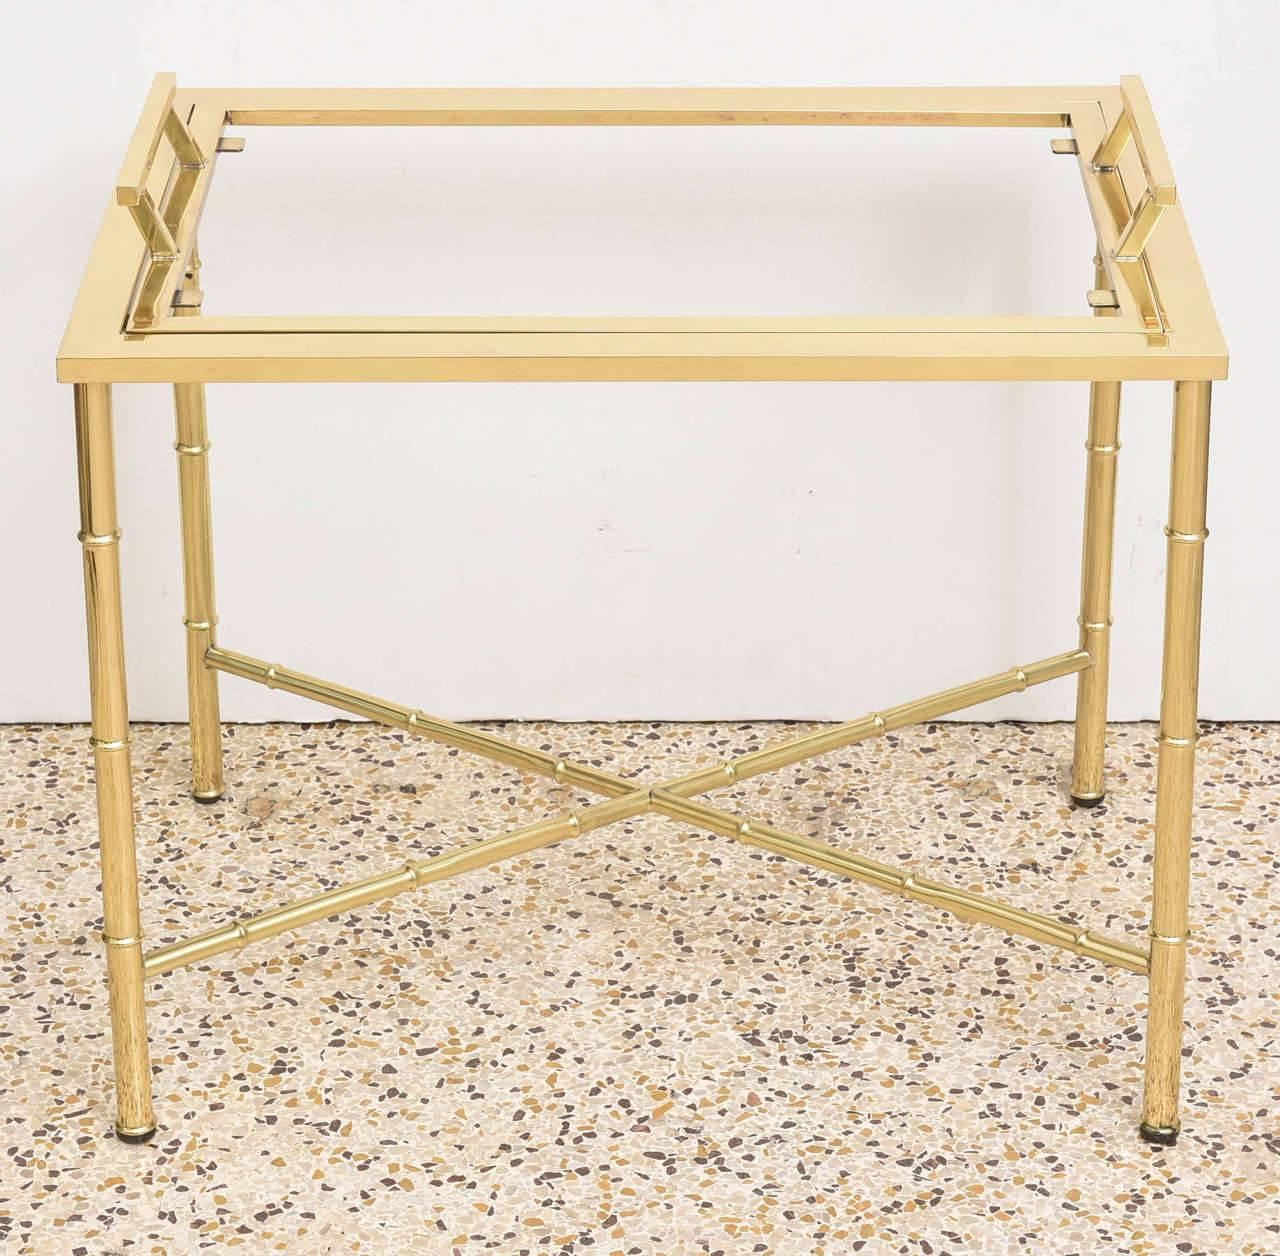 This stylish polished brass faux bamboo and glass cocktail table dates to the 1960s-1970s and was created by Mastercraft. The piece has been professionally polished and clear coated. 

For best net trade price or additional questions regarding